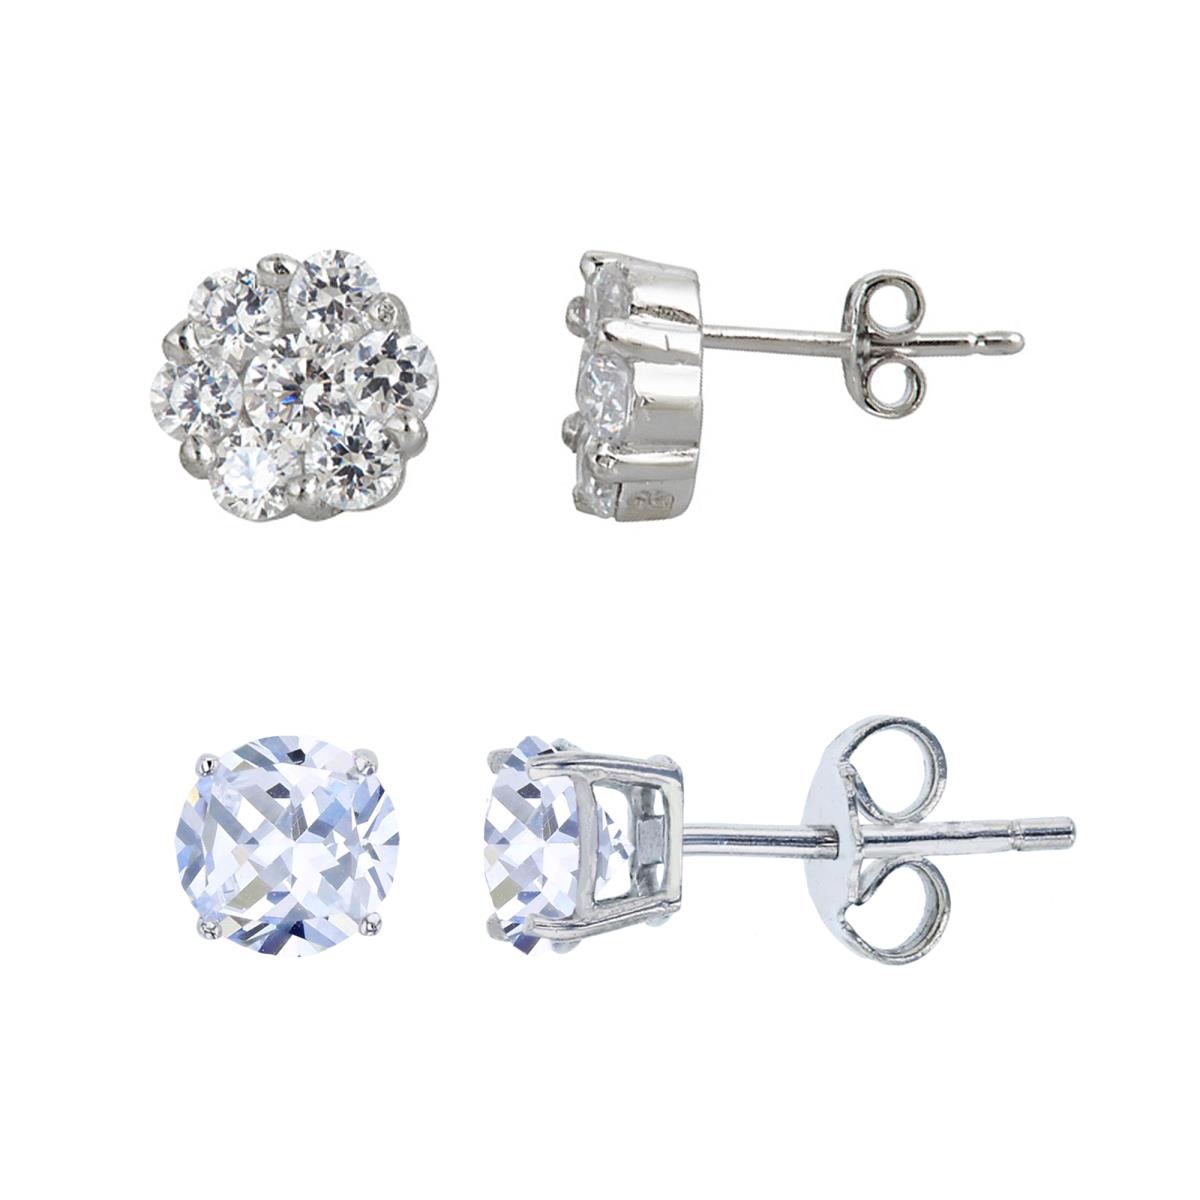 Sterling Silver Rhodium Pave Cluster & 5mm Round Solitaire Stud Earring Set